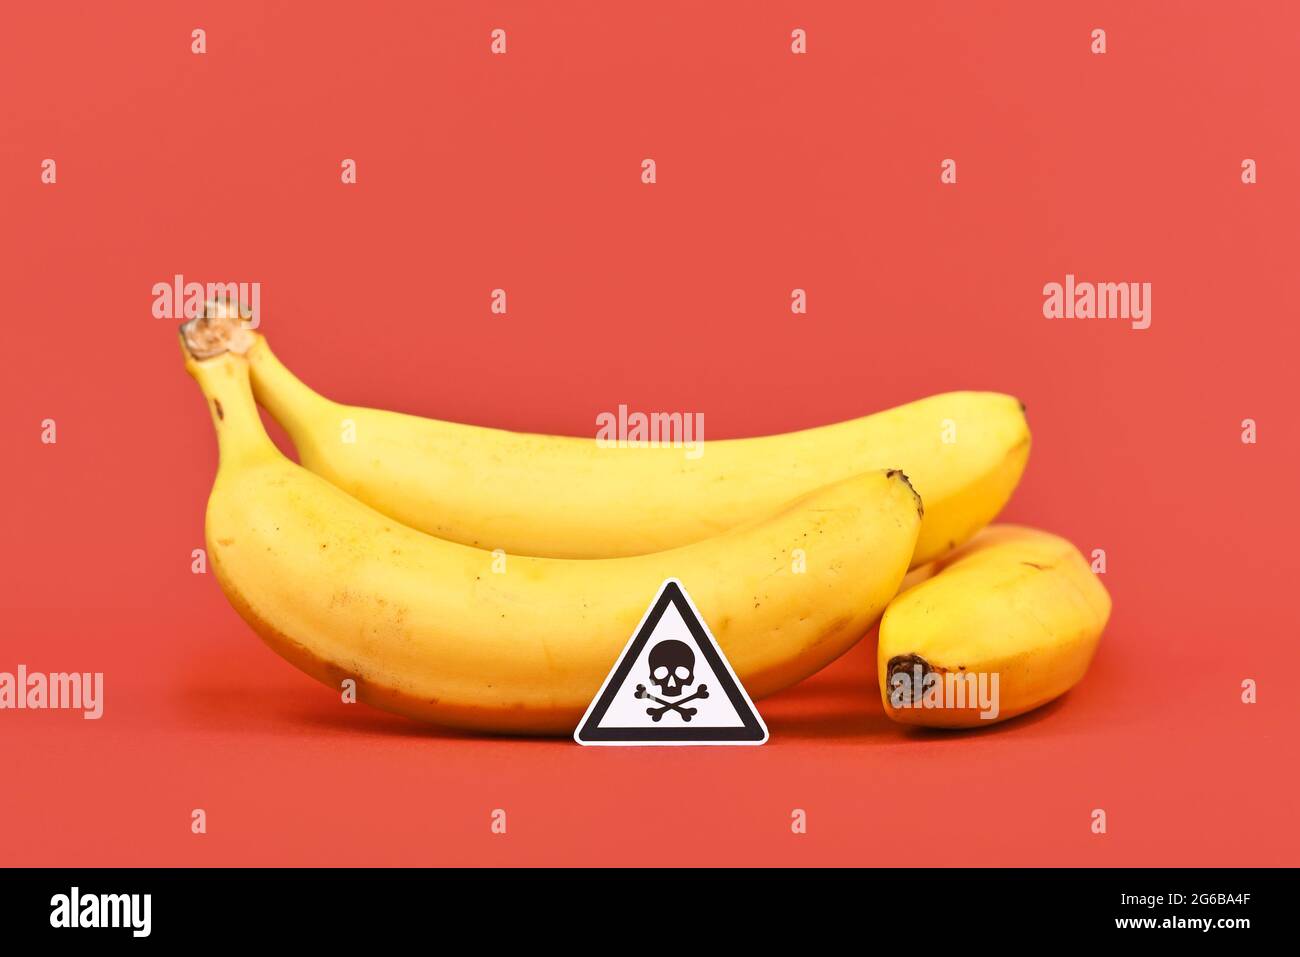 Concept for unhealthy or toxic substances in food like pesticide residues with skull warning sign in front of banana fruits on red background Stock Photo